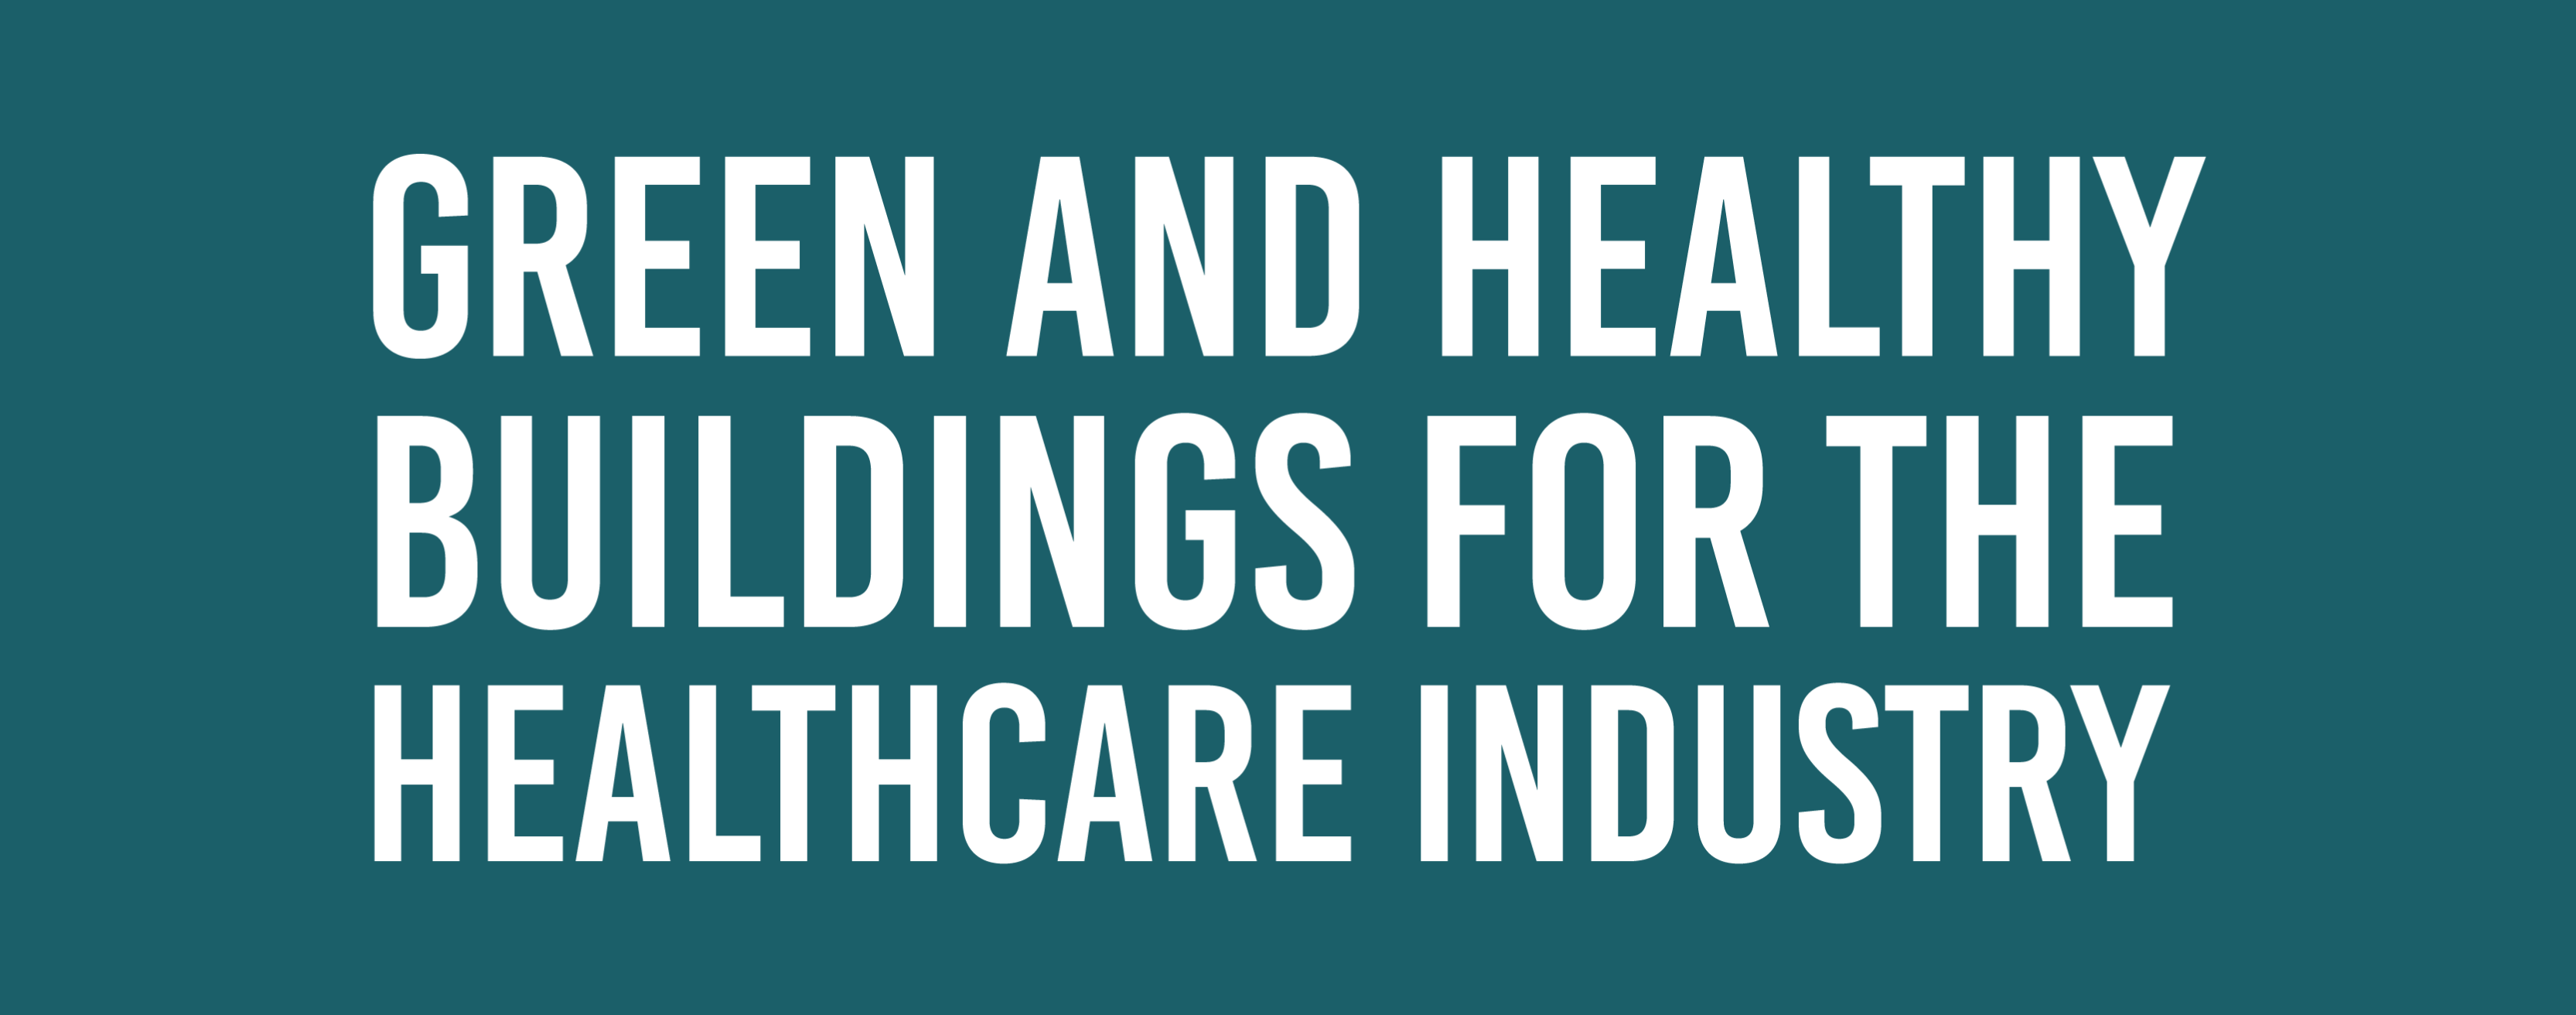 Green and Healthy Buildings for Healthcare